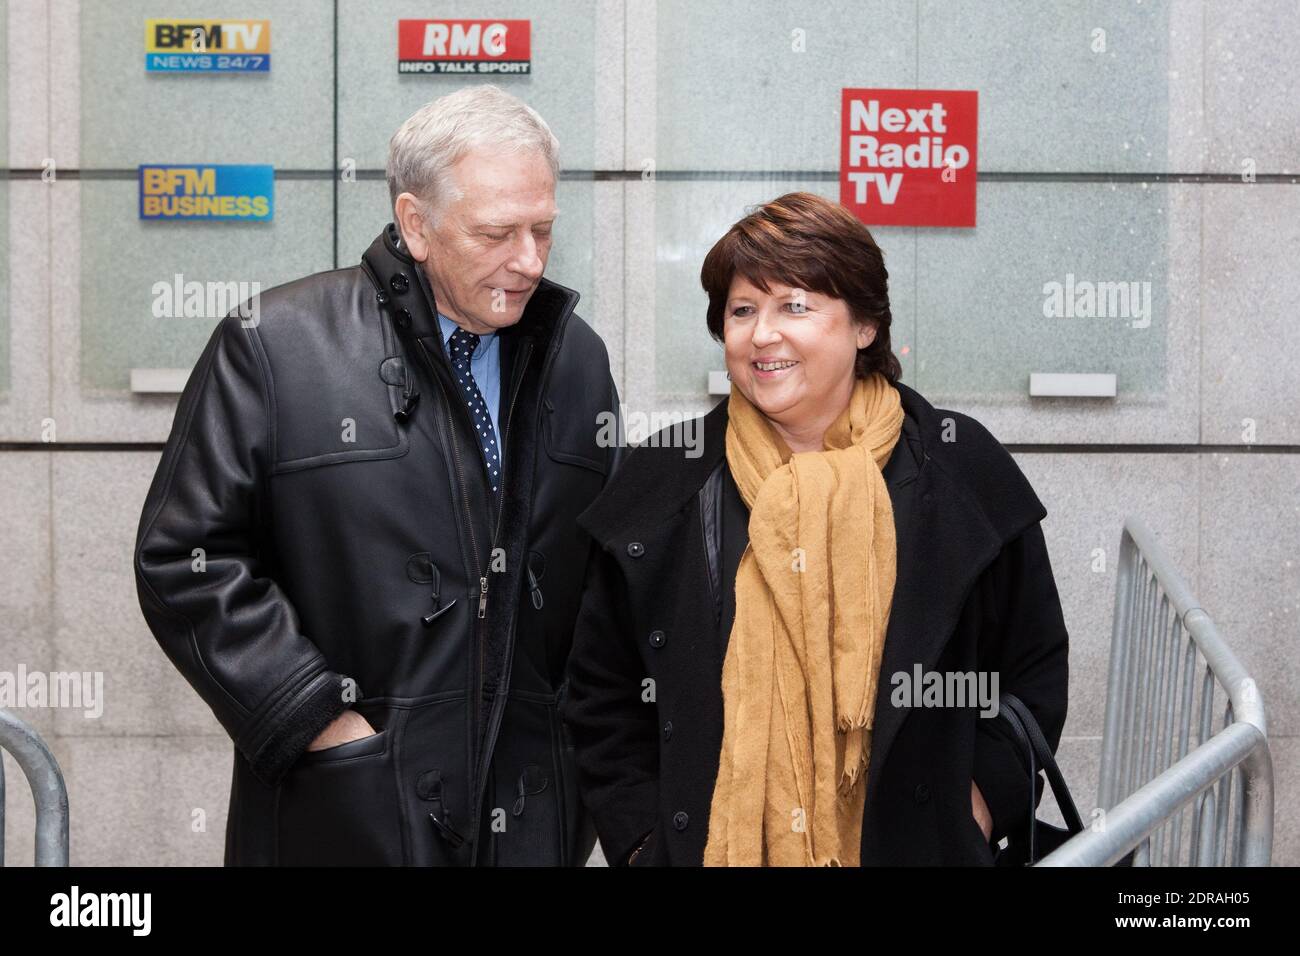 Exclusive - Mayor of Lille Martine Aubry is interviewed by Jean-Jacques  Bourdin on RMC radio in Paris, France on December 03, 2015. Photo by Audrey  Poree/ ABACAPRESS.COM Stock Photo - Alamy